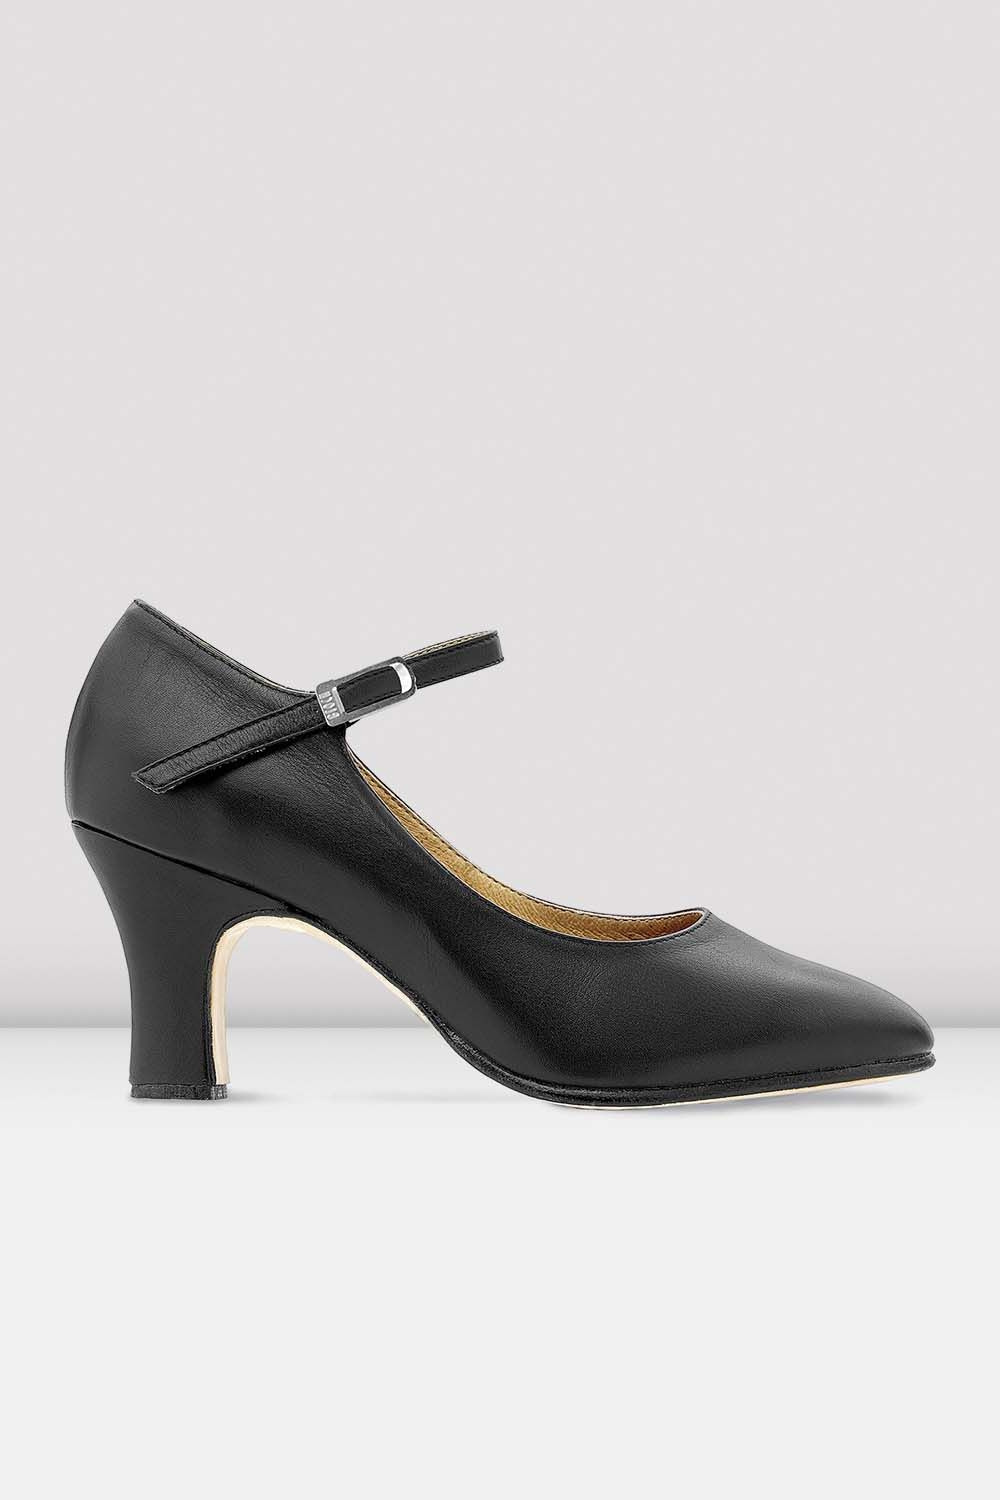 BLOCH Ladies Chord Ankle Strap Leather Character Shoes, Black Leather